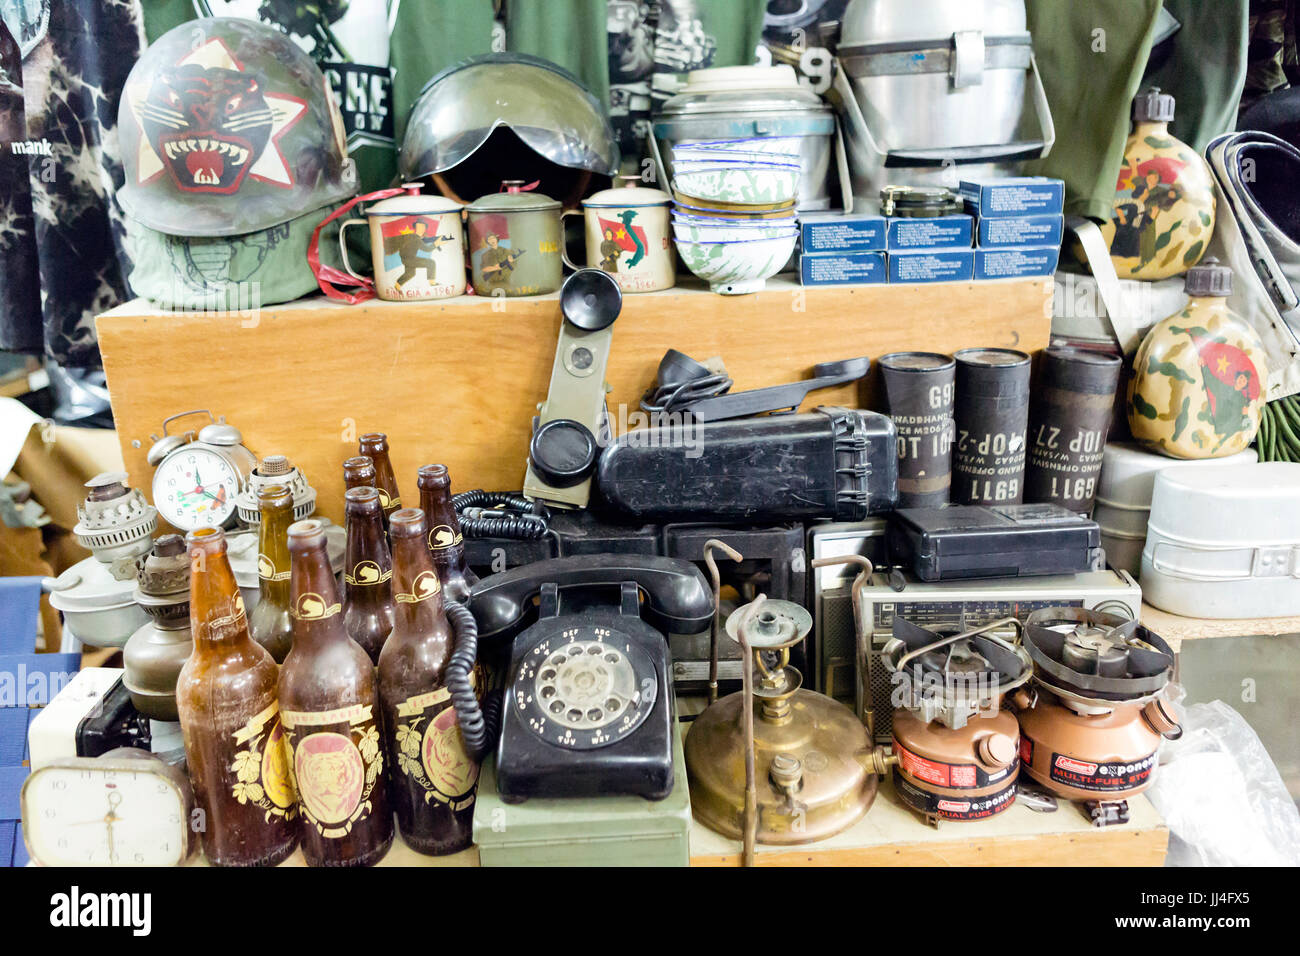 Dan Sinh Market known as the War Surplus Market is in Ho Chi Minh City, Vietnam and is known for Vietnam War surplus militaria and memorabilia. Stock Photo